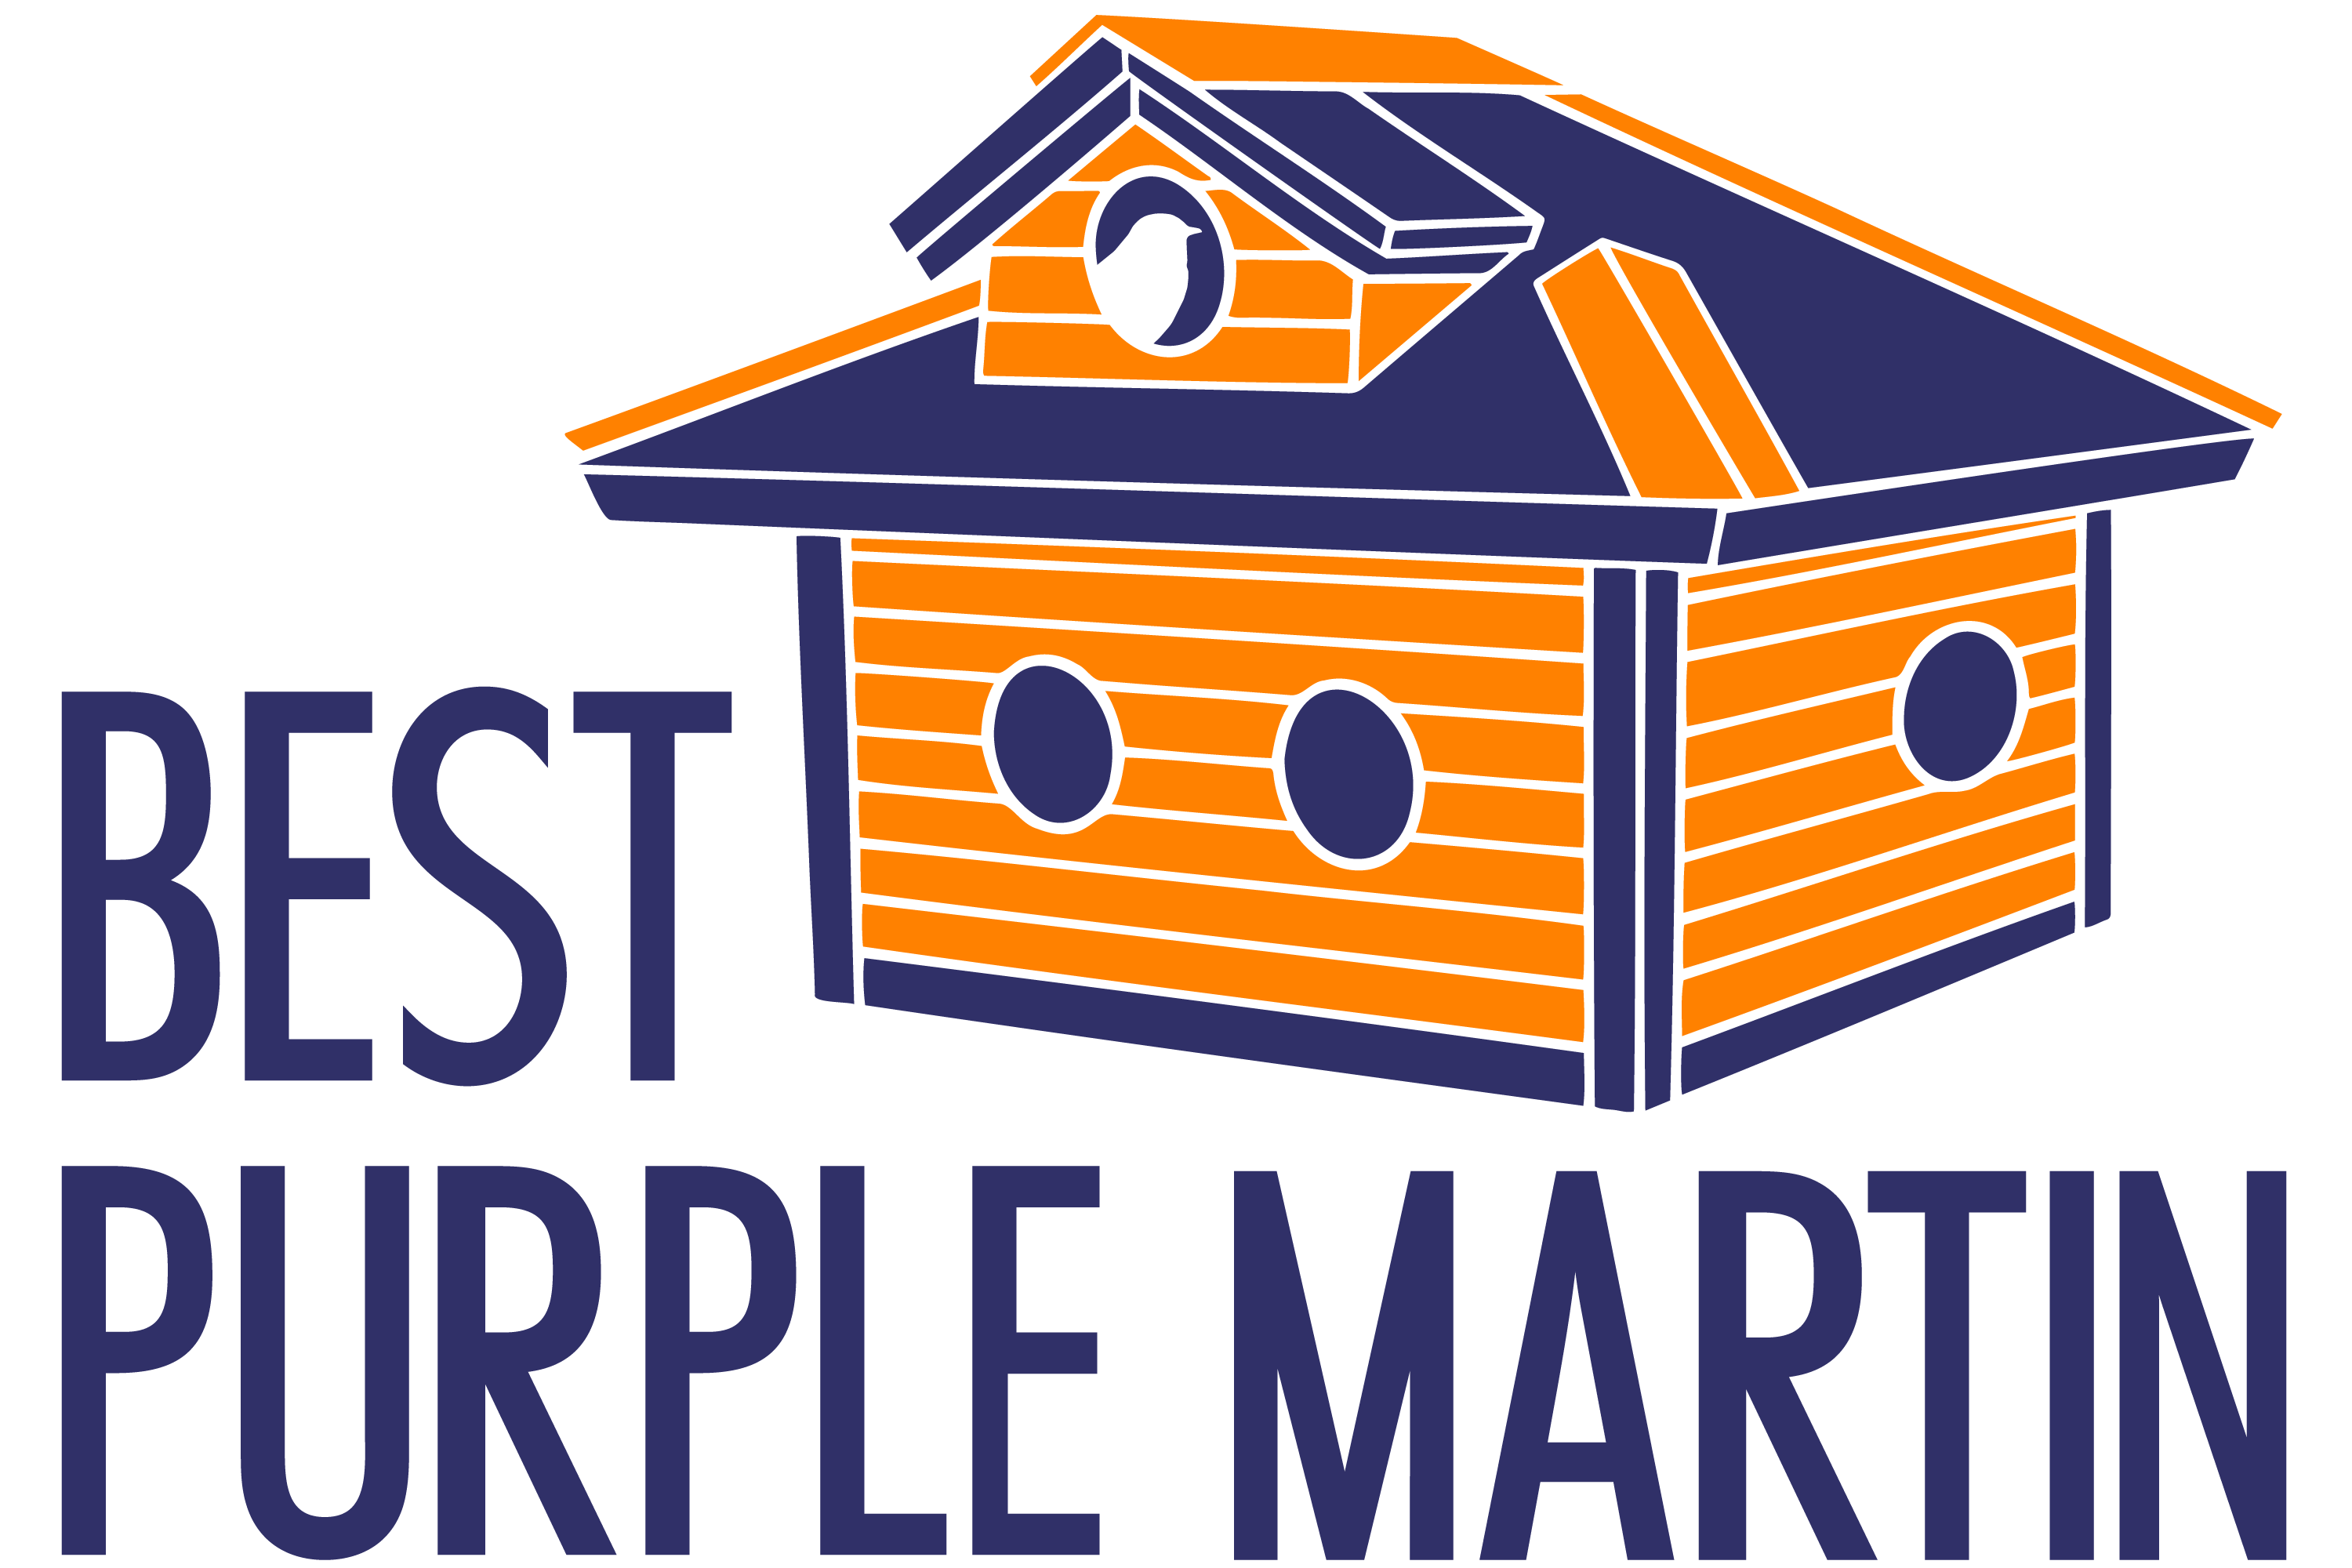 Best Purple Martin Products